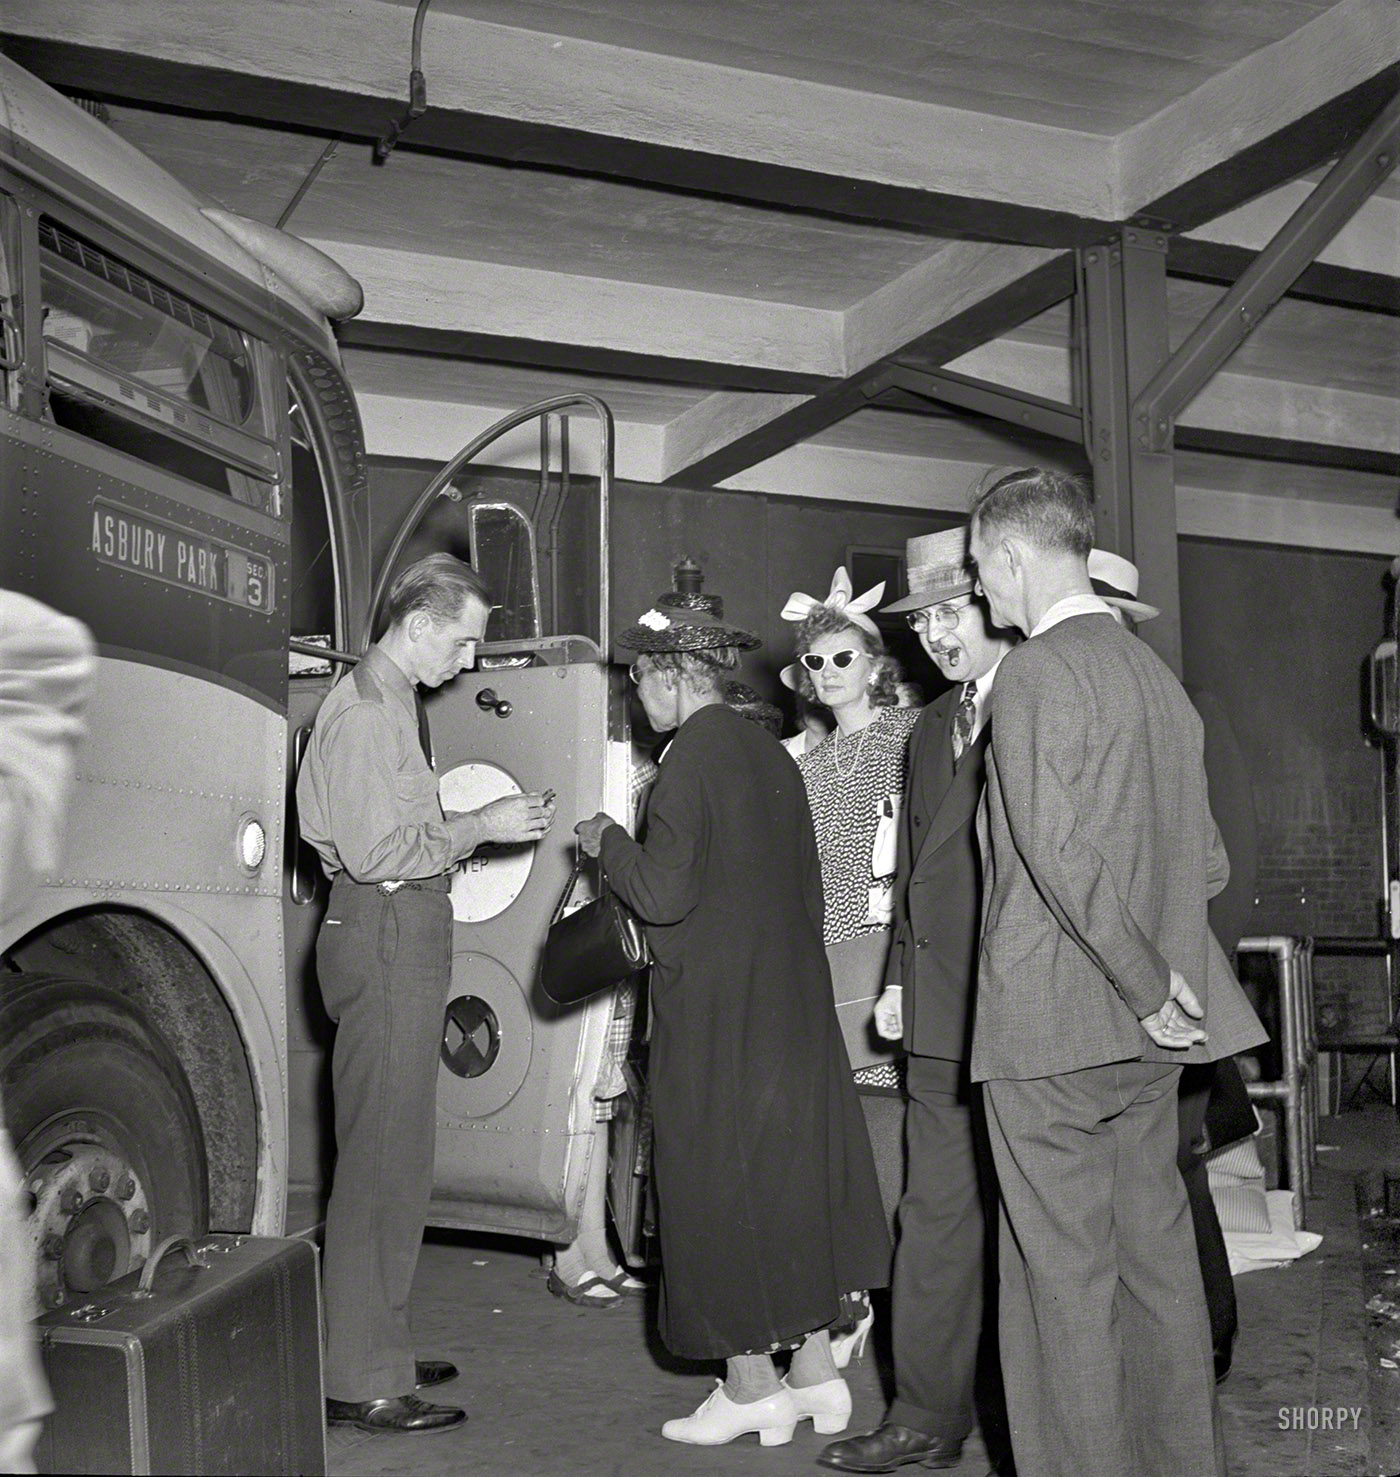 September 1942. "New York, New York. Boarding interstate buses at the Greyhound terminal, 34th Street." En route to Asbury Park, safe from the paparazzi. Photo by Marjory Collins, Office of War Information. View full size.